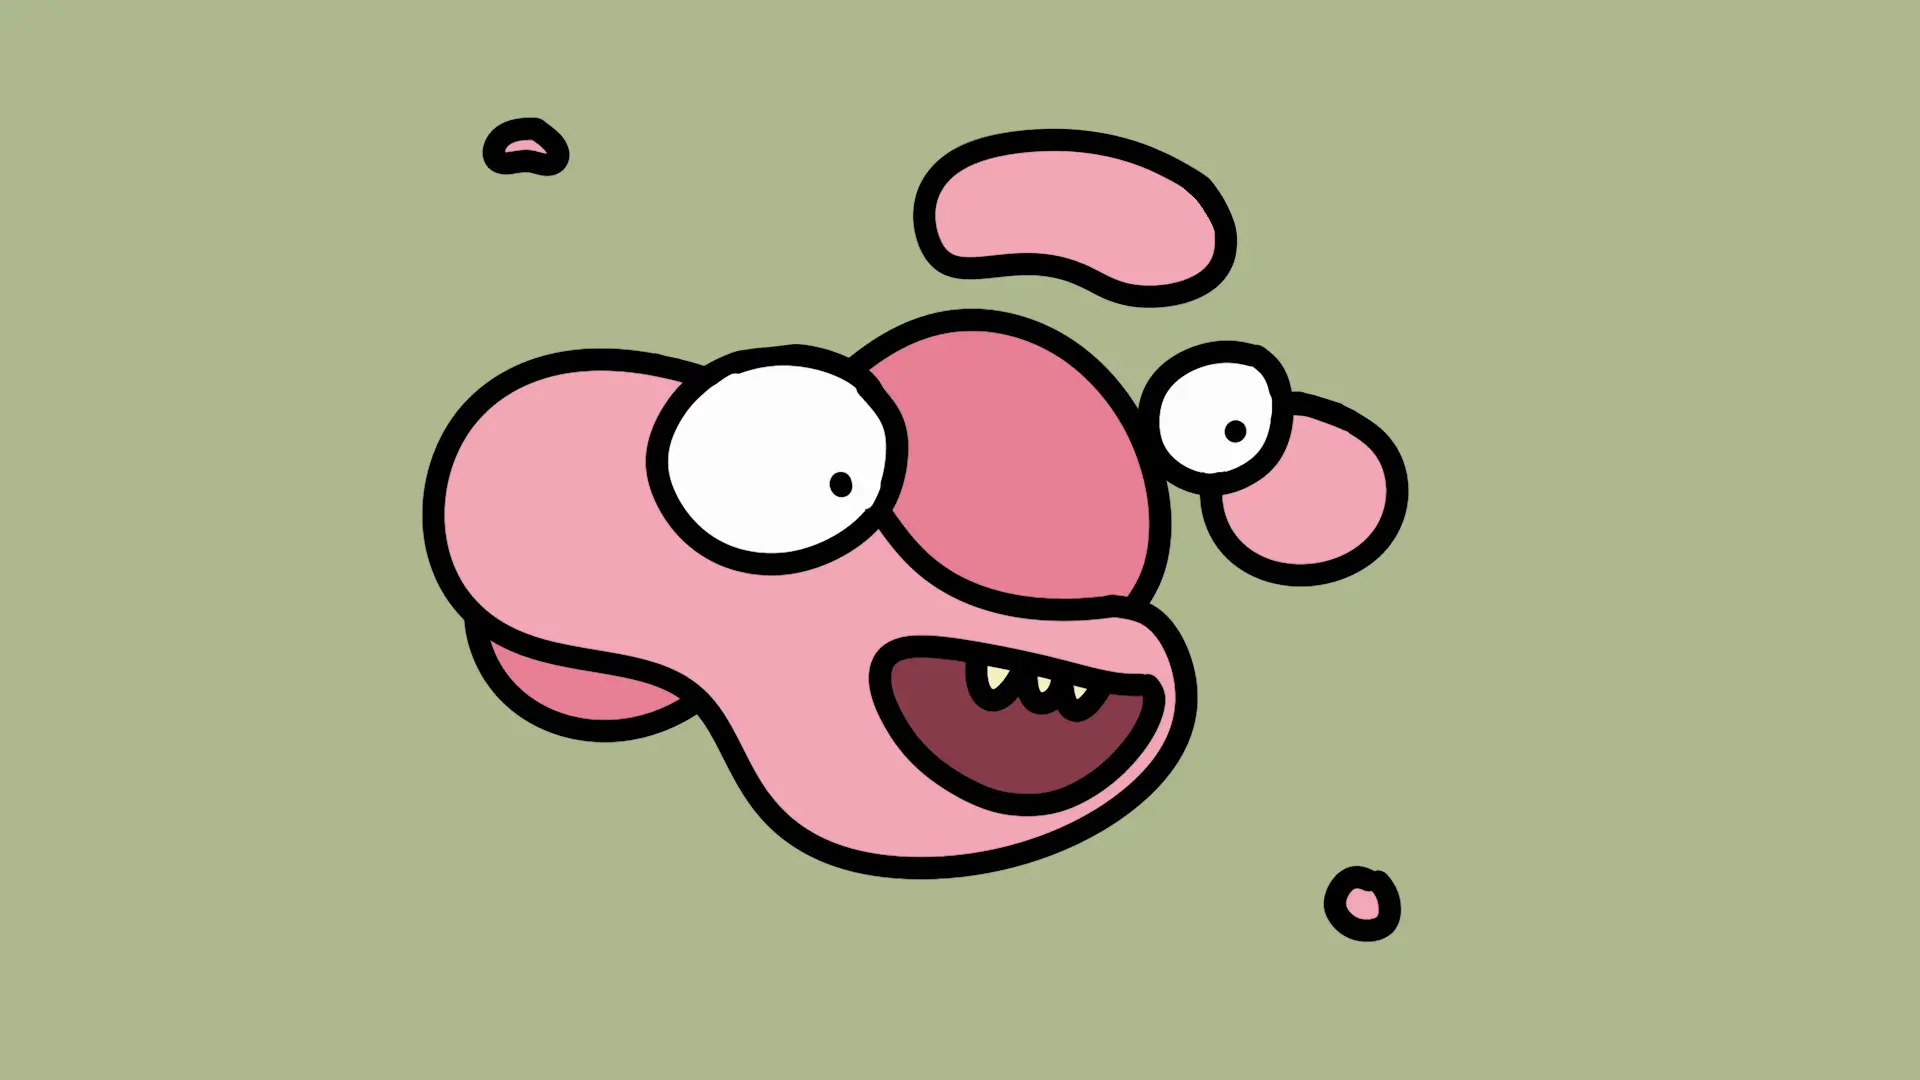 Frame by Frame Animation of a Blob